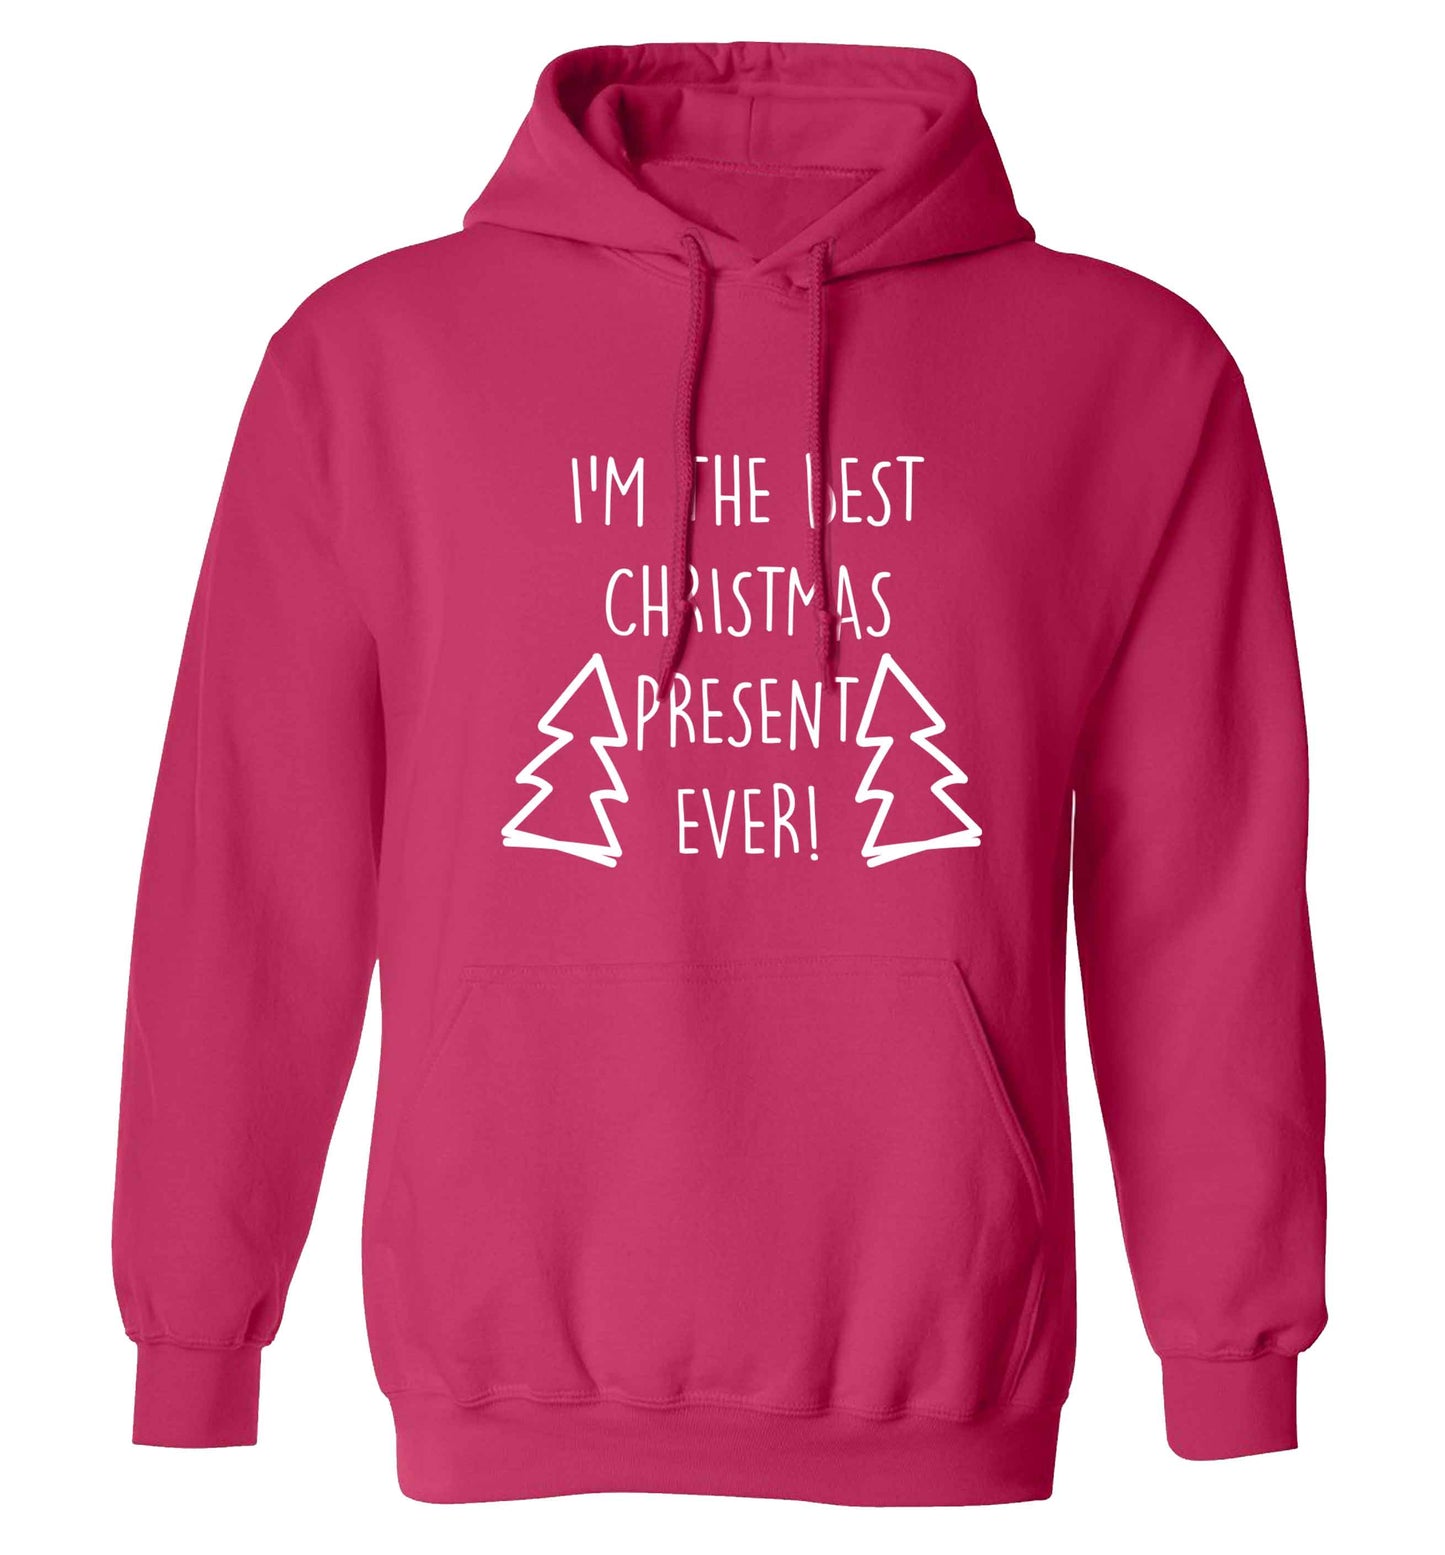 I'm the best Christmas present ever adults unisex pink hoodie 2XL